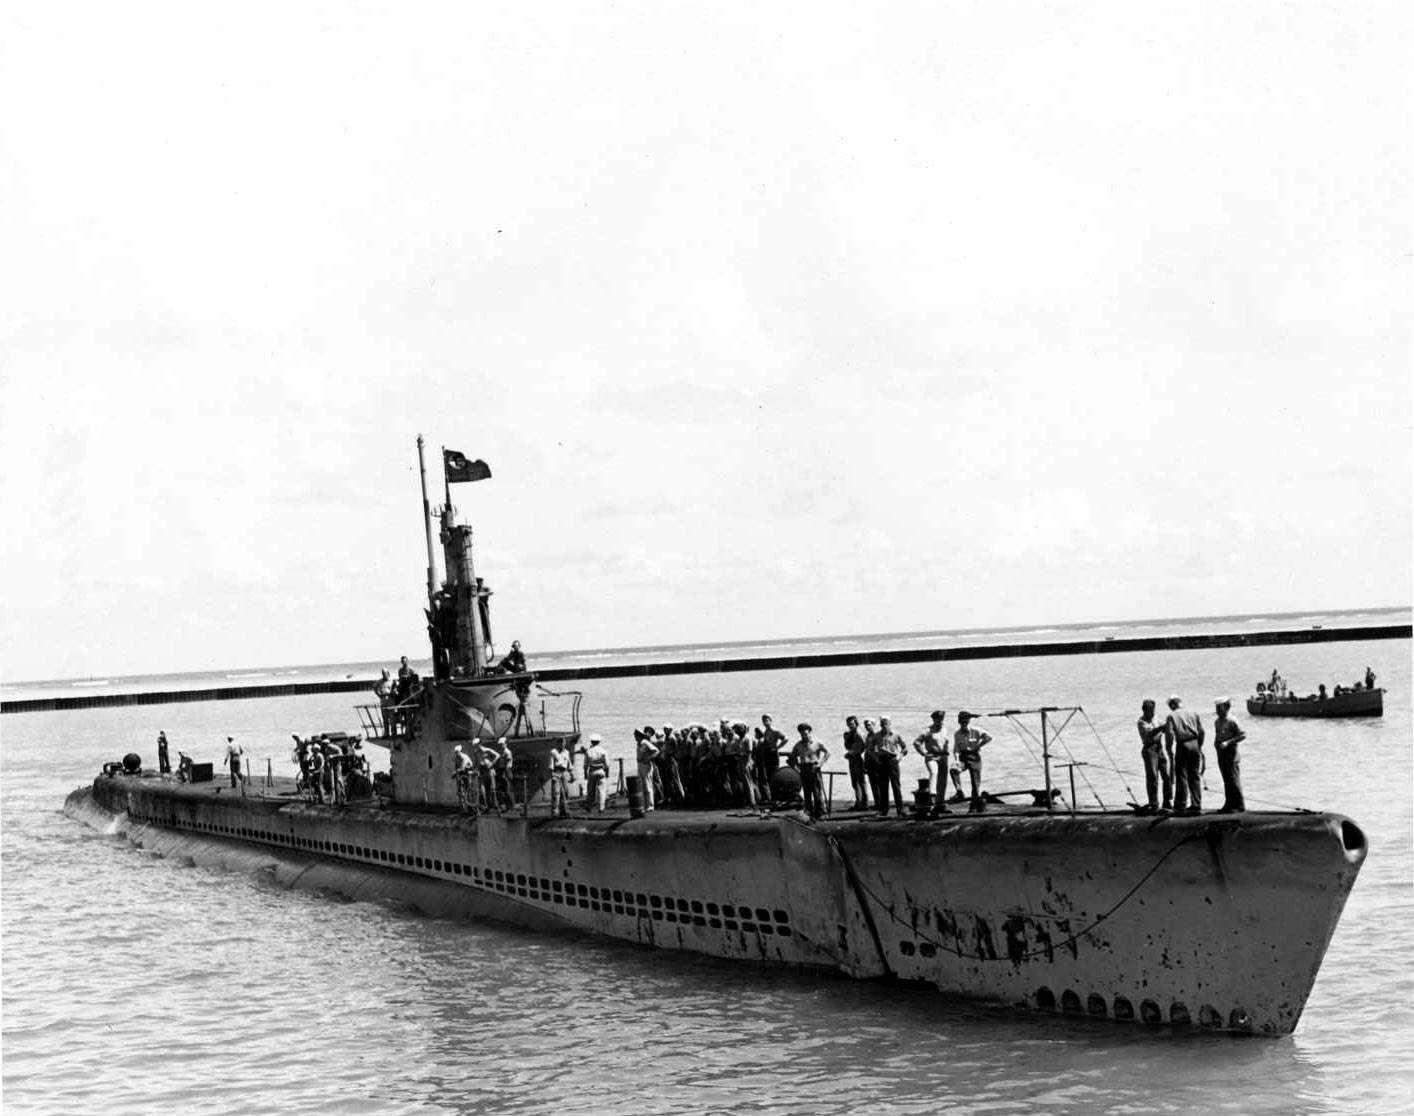 Submarine USS Bowfin arriving at Fremantle, Australia, probably from her second war patrol in Dec 1943.